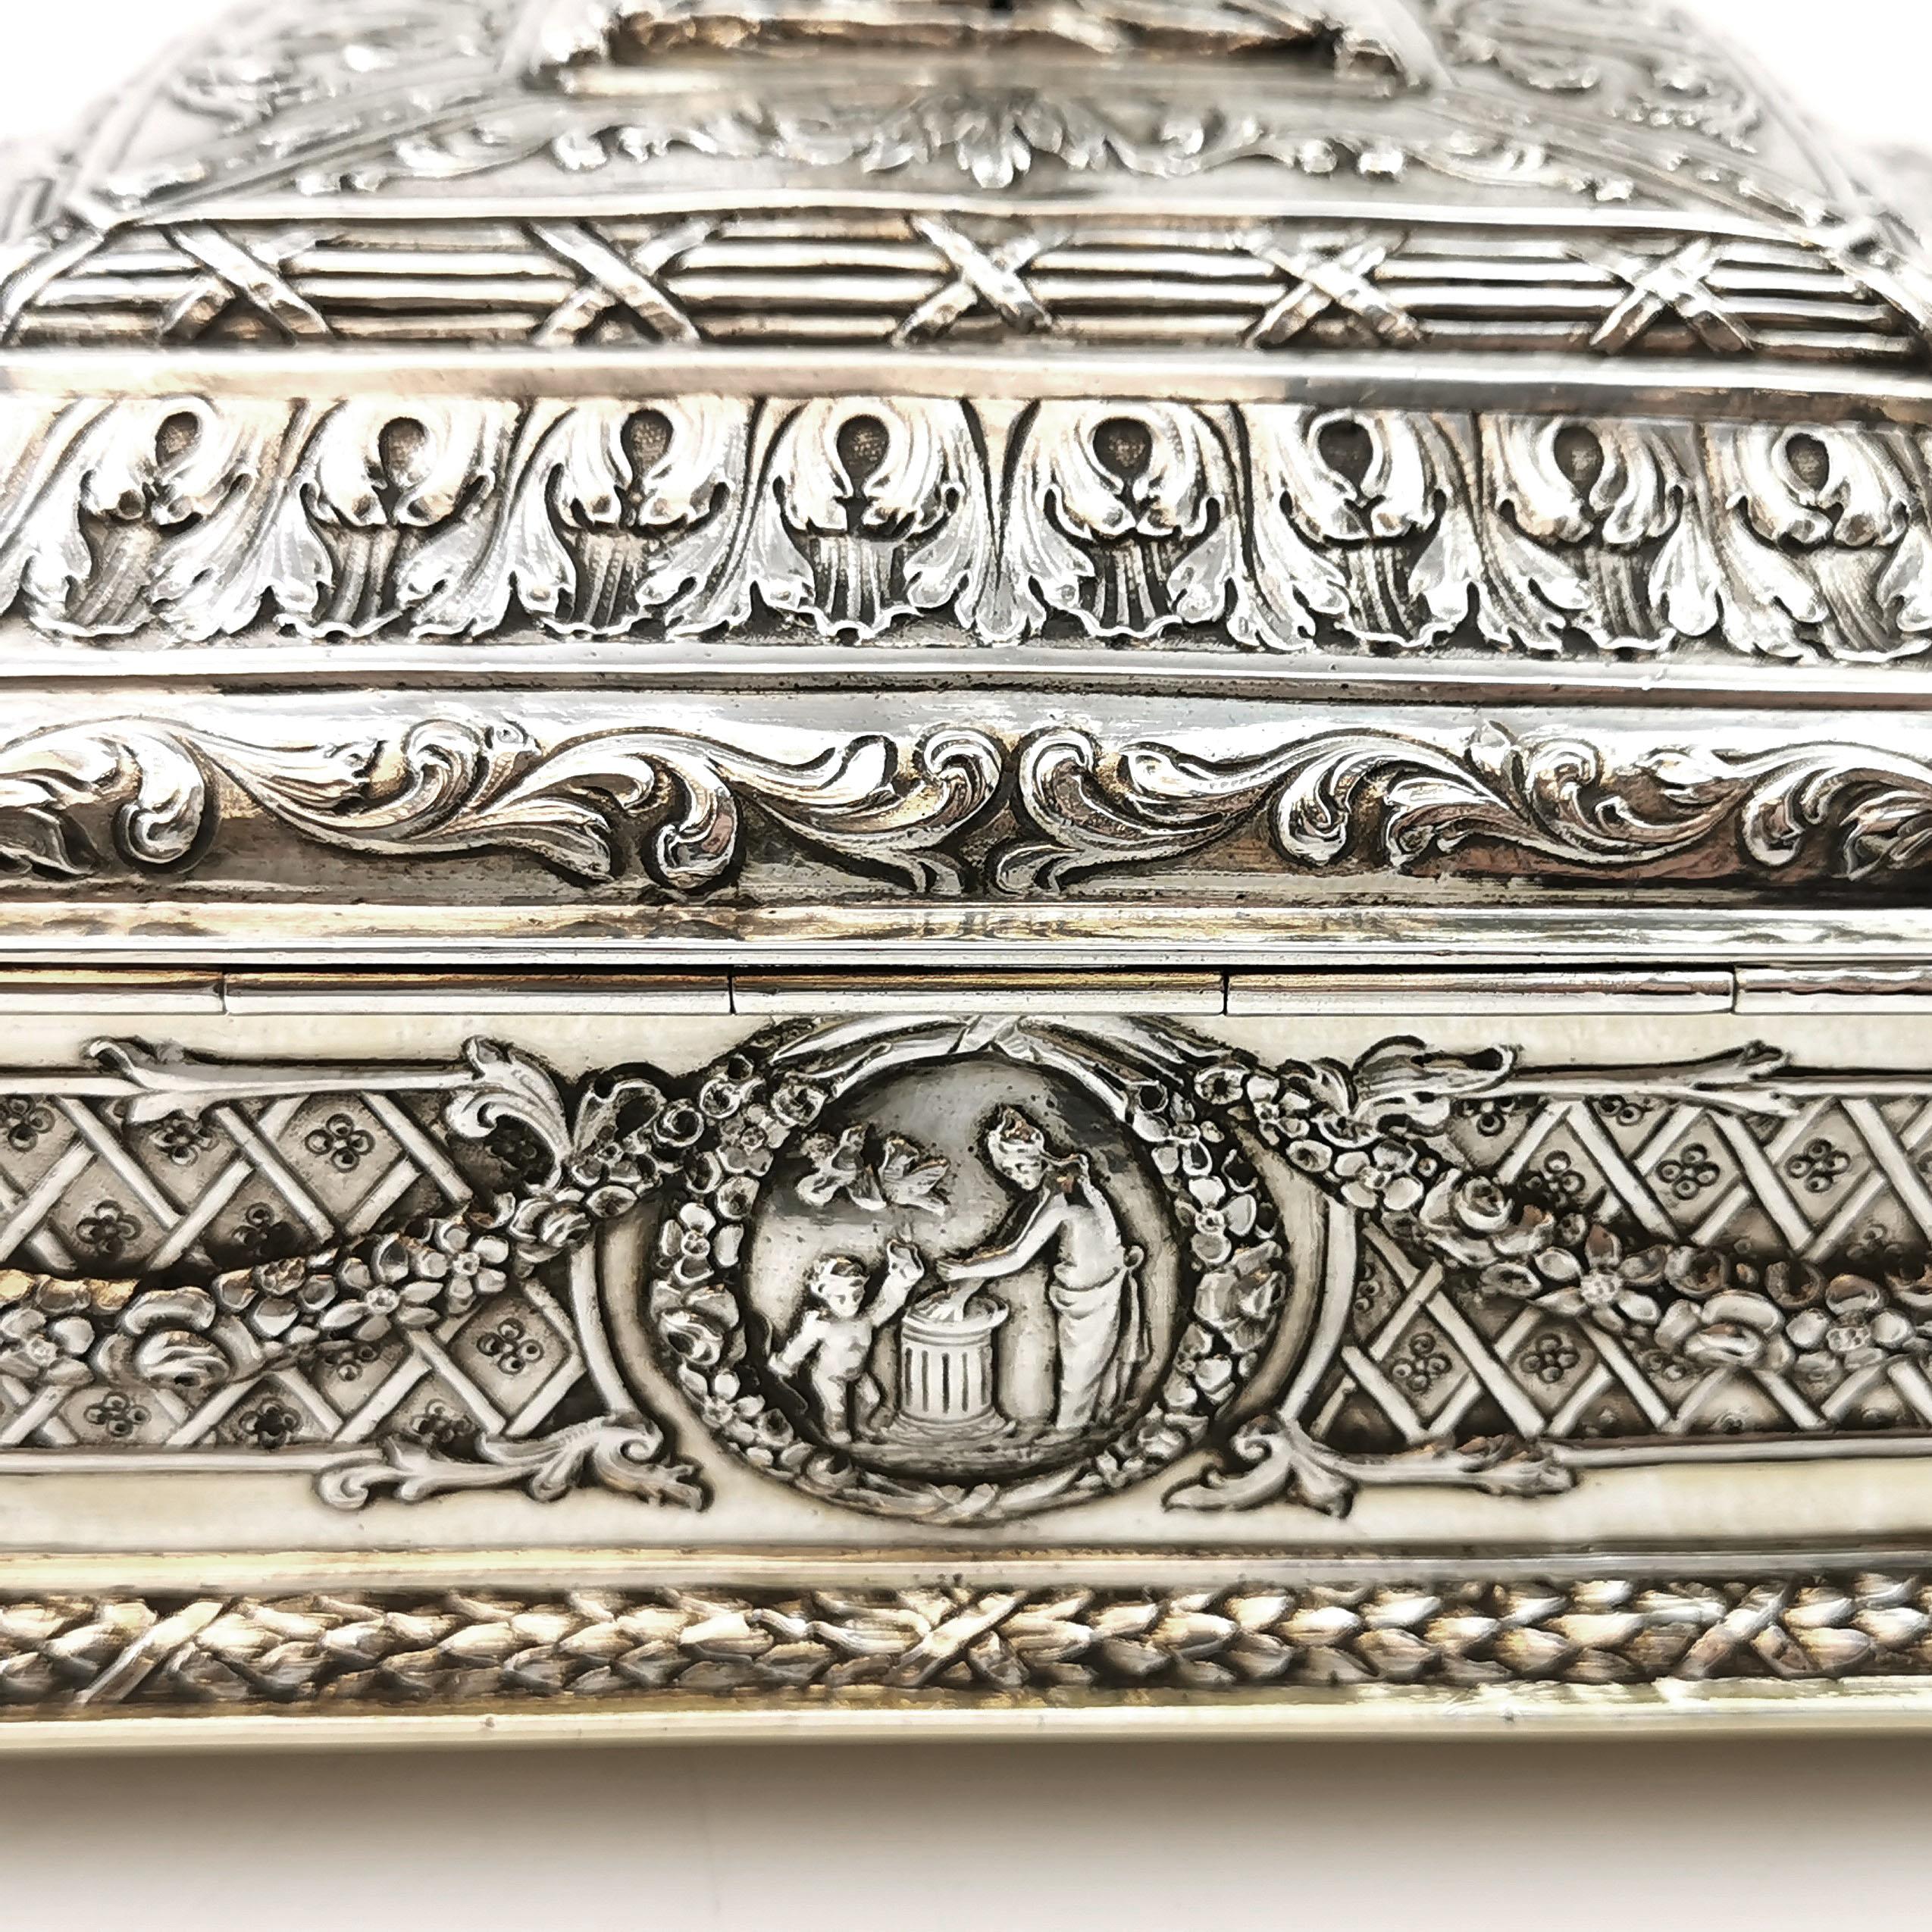 20th Century Antique Sterling Silver Box 1905 English Import Marks Jewellery Jewelry Trinket